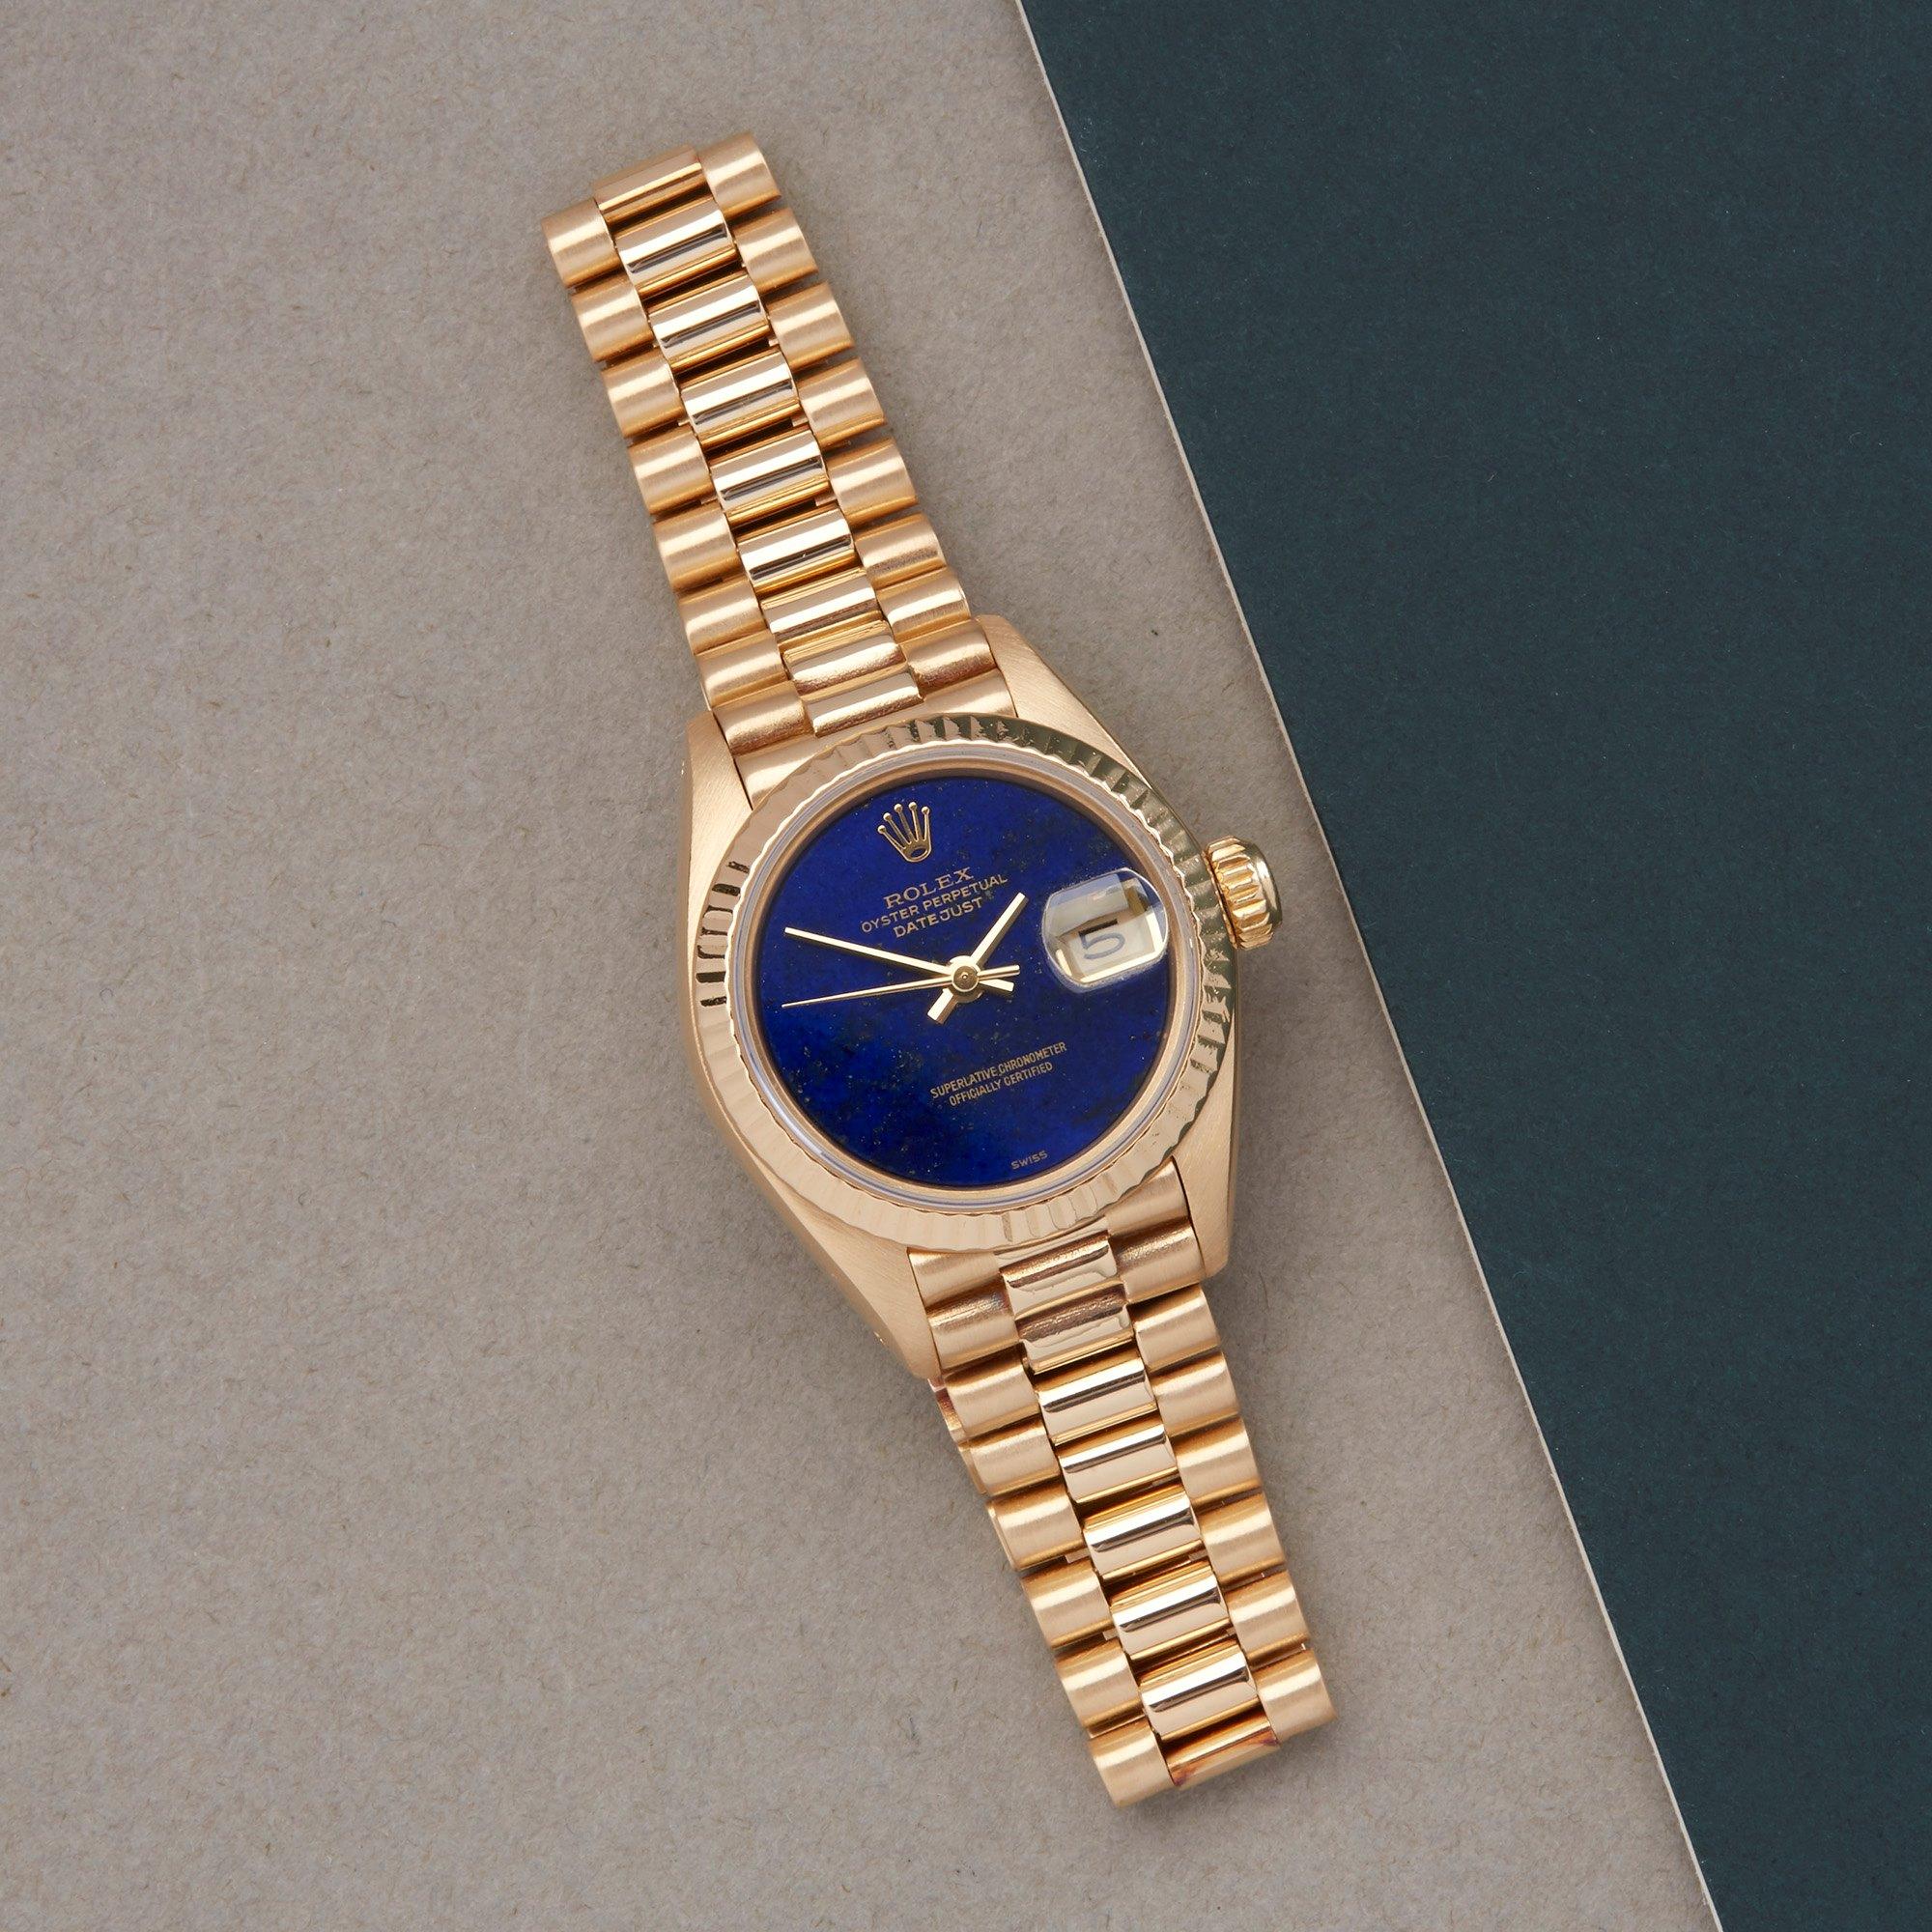 Xupes Reference: COM002646
Manufacturer: Rolex
Model: Datejust
Model Variant: 26
Model Number: 69178
Age: 1982
Gender: Ladies
Complete With: Rolex Box 
Dial: Blue Lapis Lazuli
Glass: Sapphire Crystal
Case Material: Yellow Gold
Strap Material: Yellow